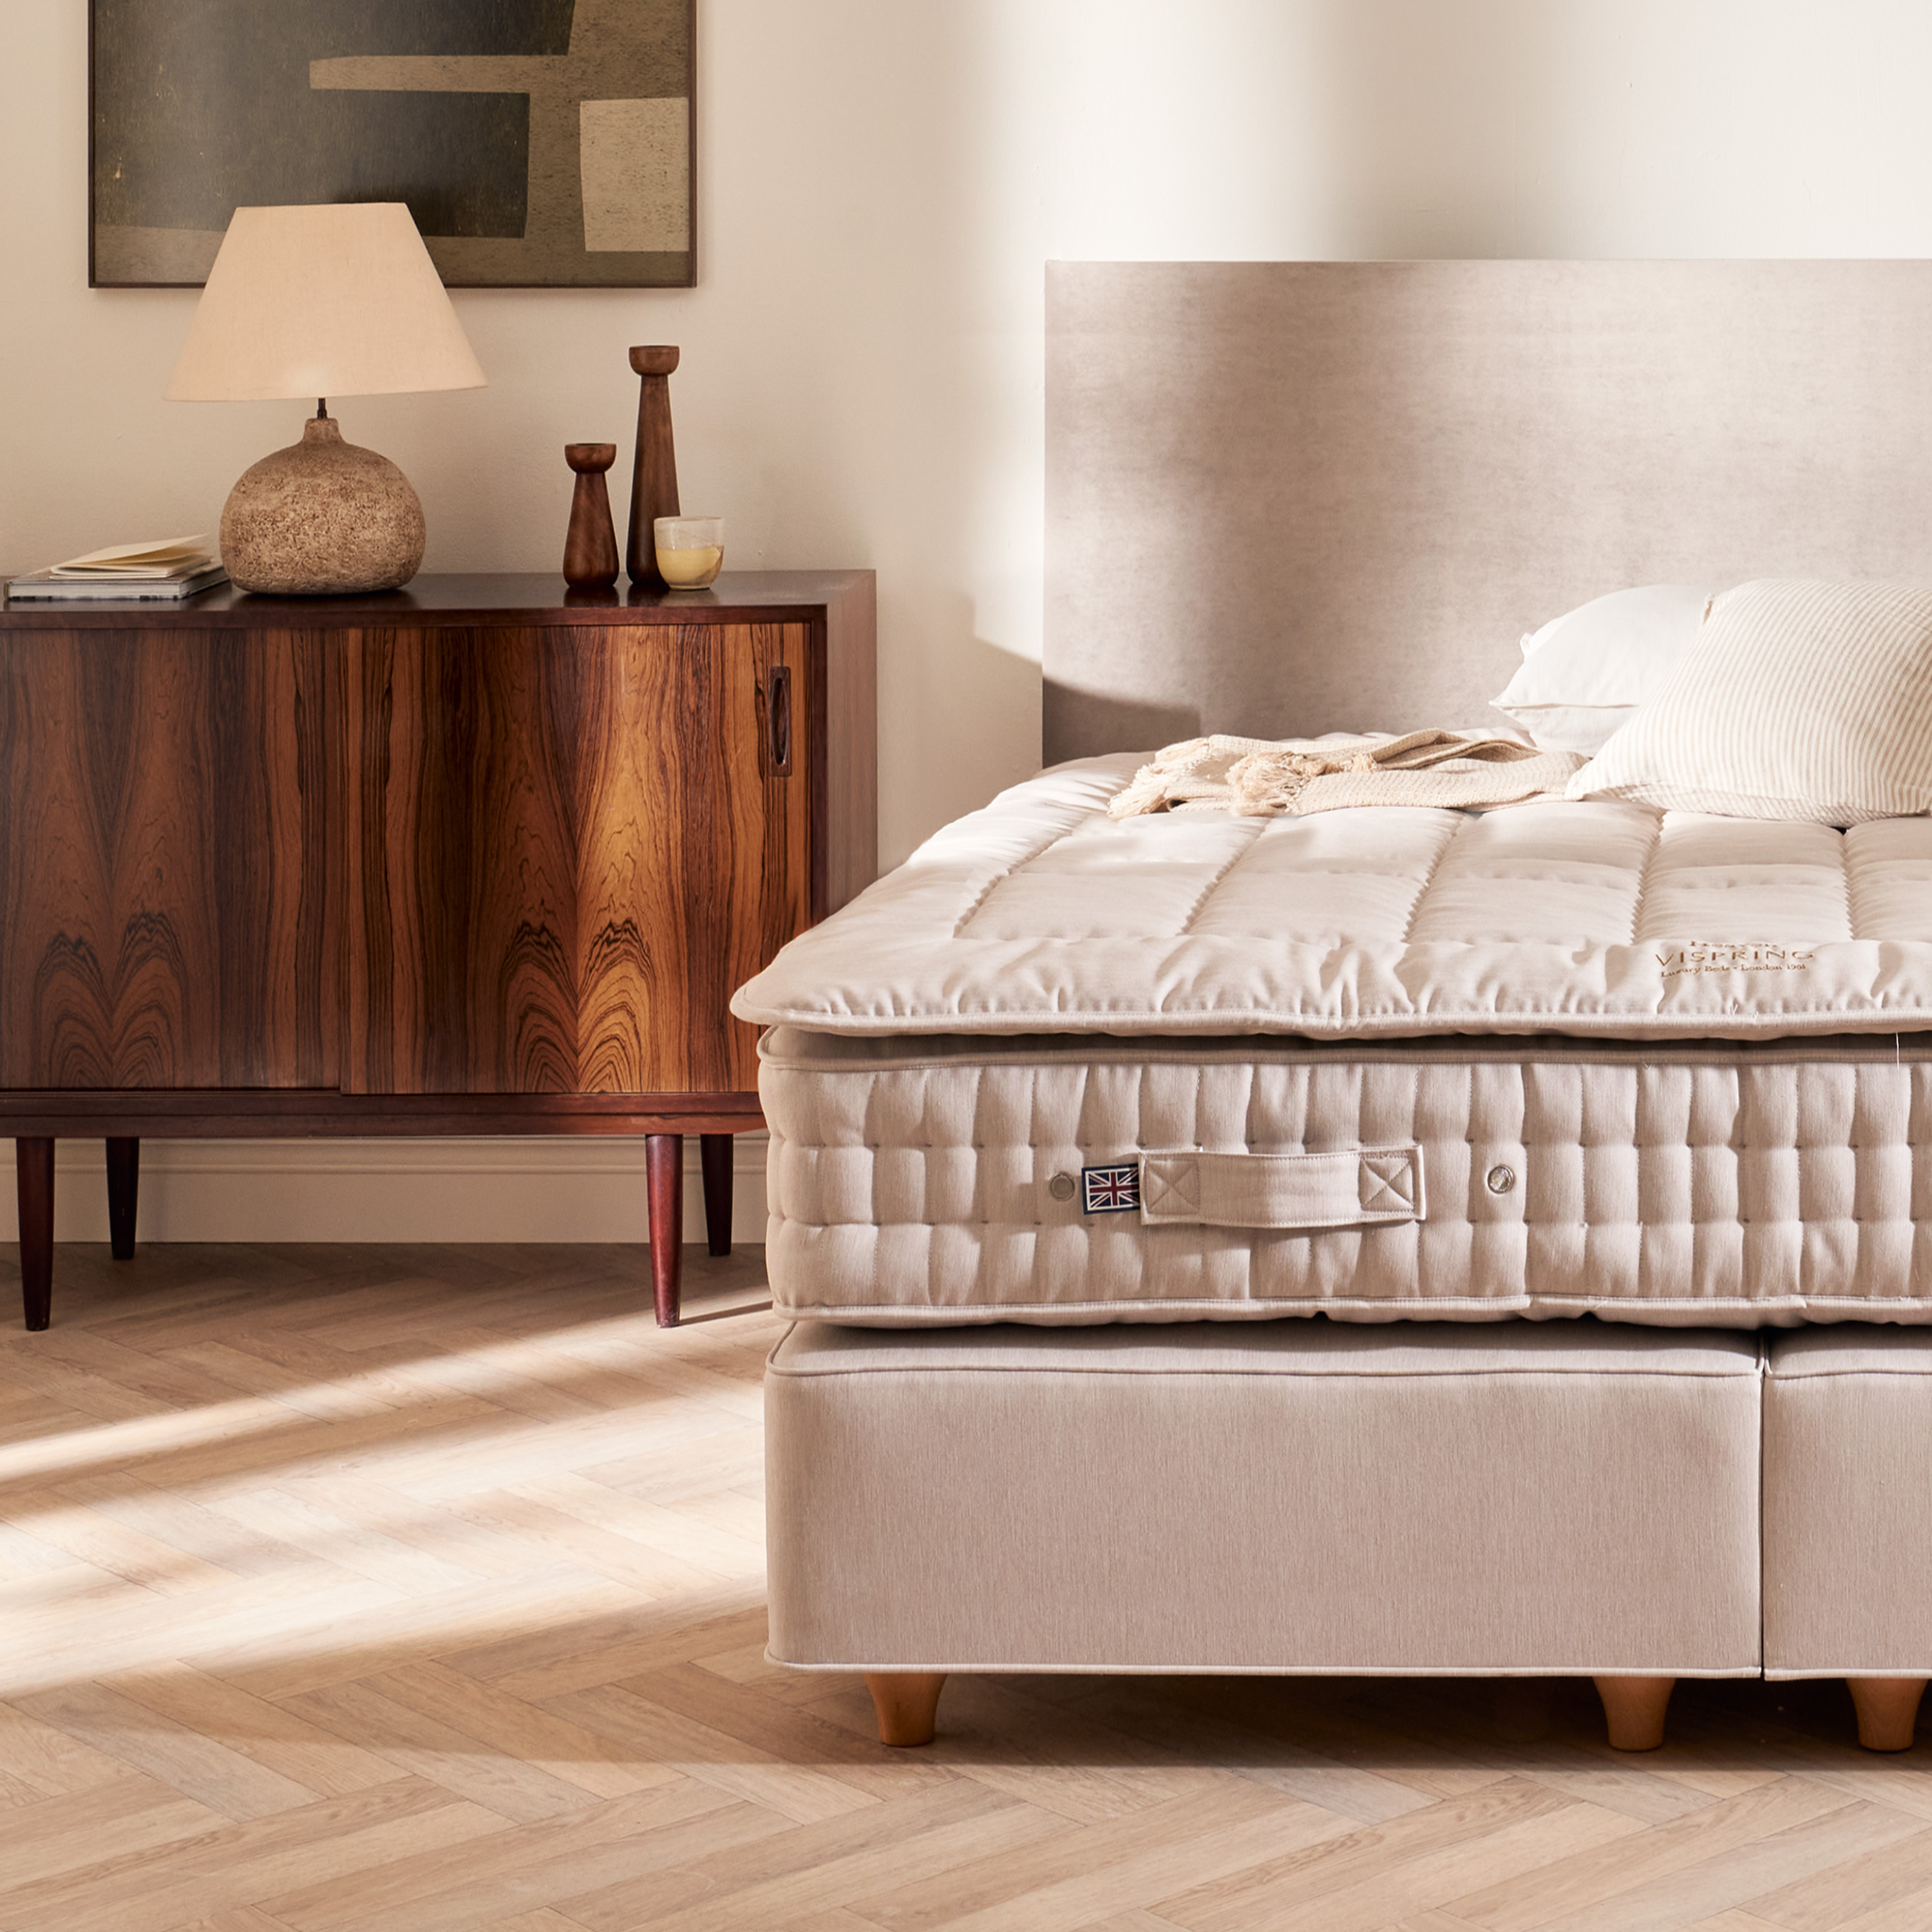 The Baronet (aka Bayswater) is an entry level mattress with horse hair and wool. 1,716 coils (per king) combine with the horse hair, wool, and cotton fill for a superbly comfortable mattress that is moderately firm with all the support you could ask for.